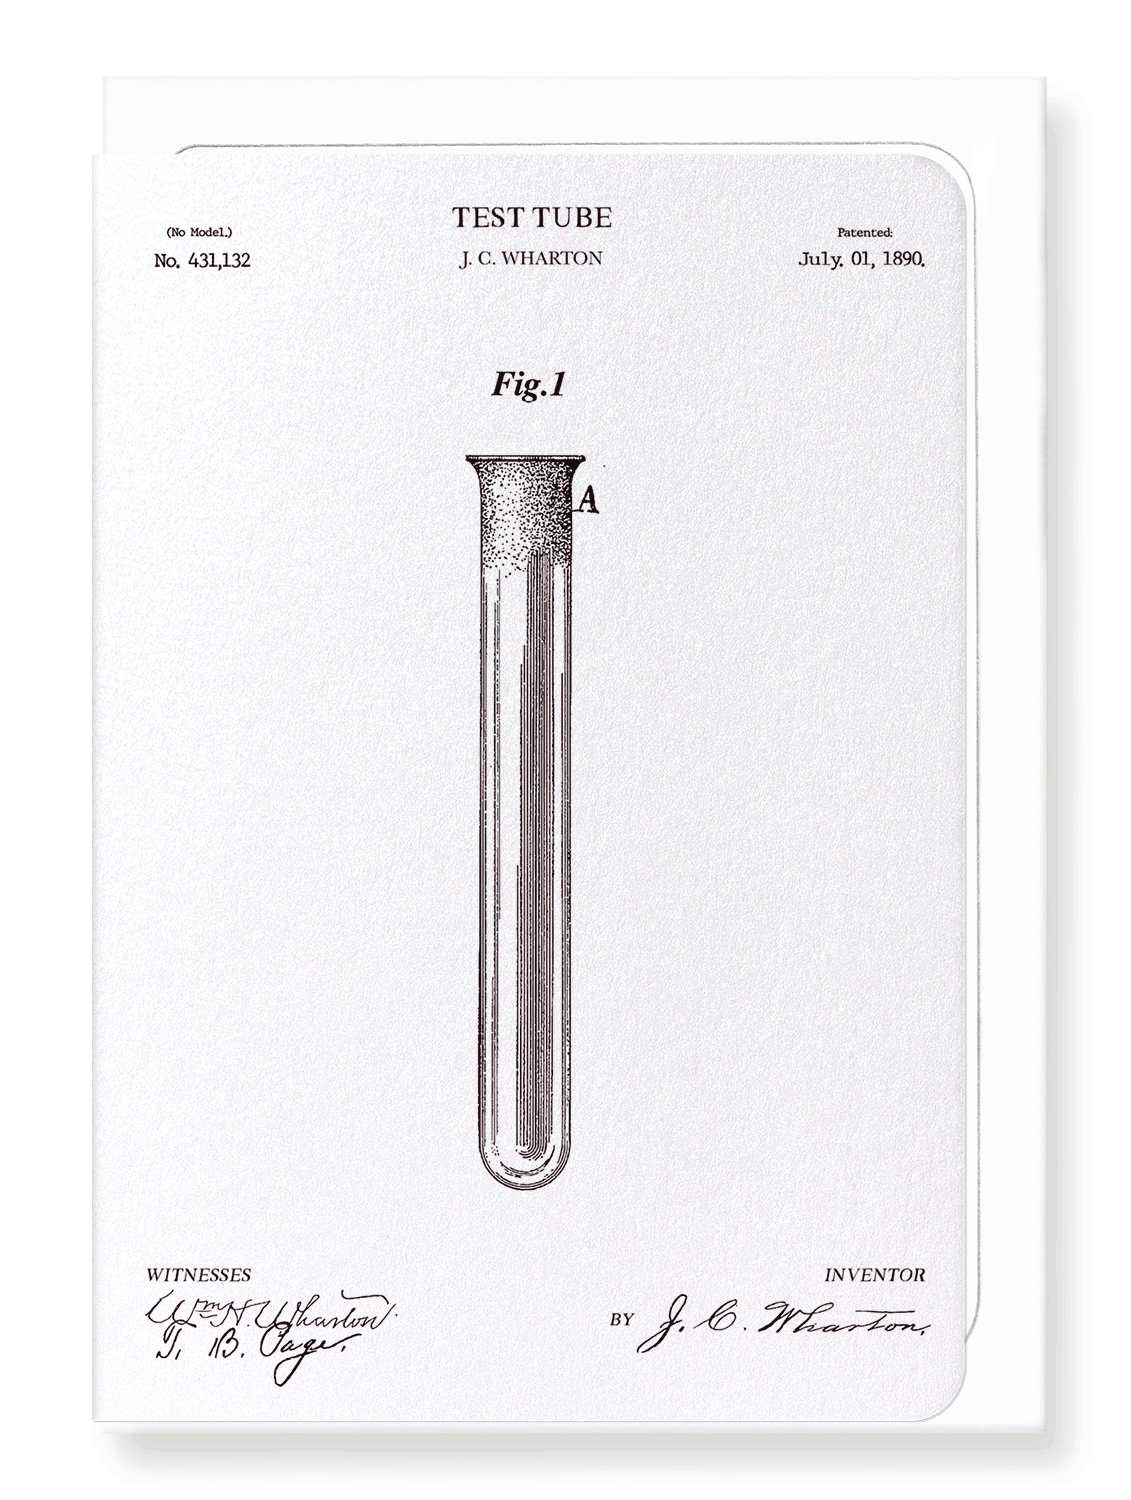 Ezen Designs - Patent of test tube (1890) - Greeting Card - Front